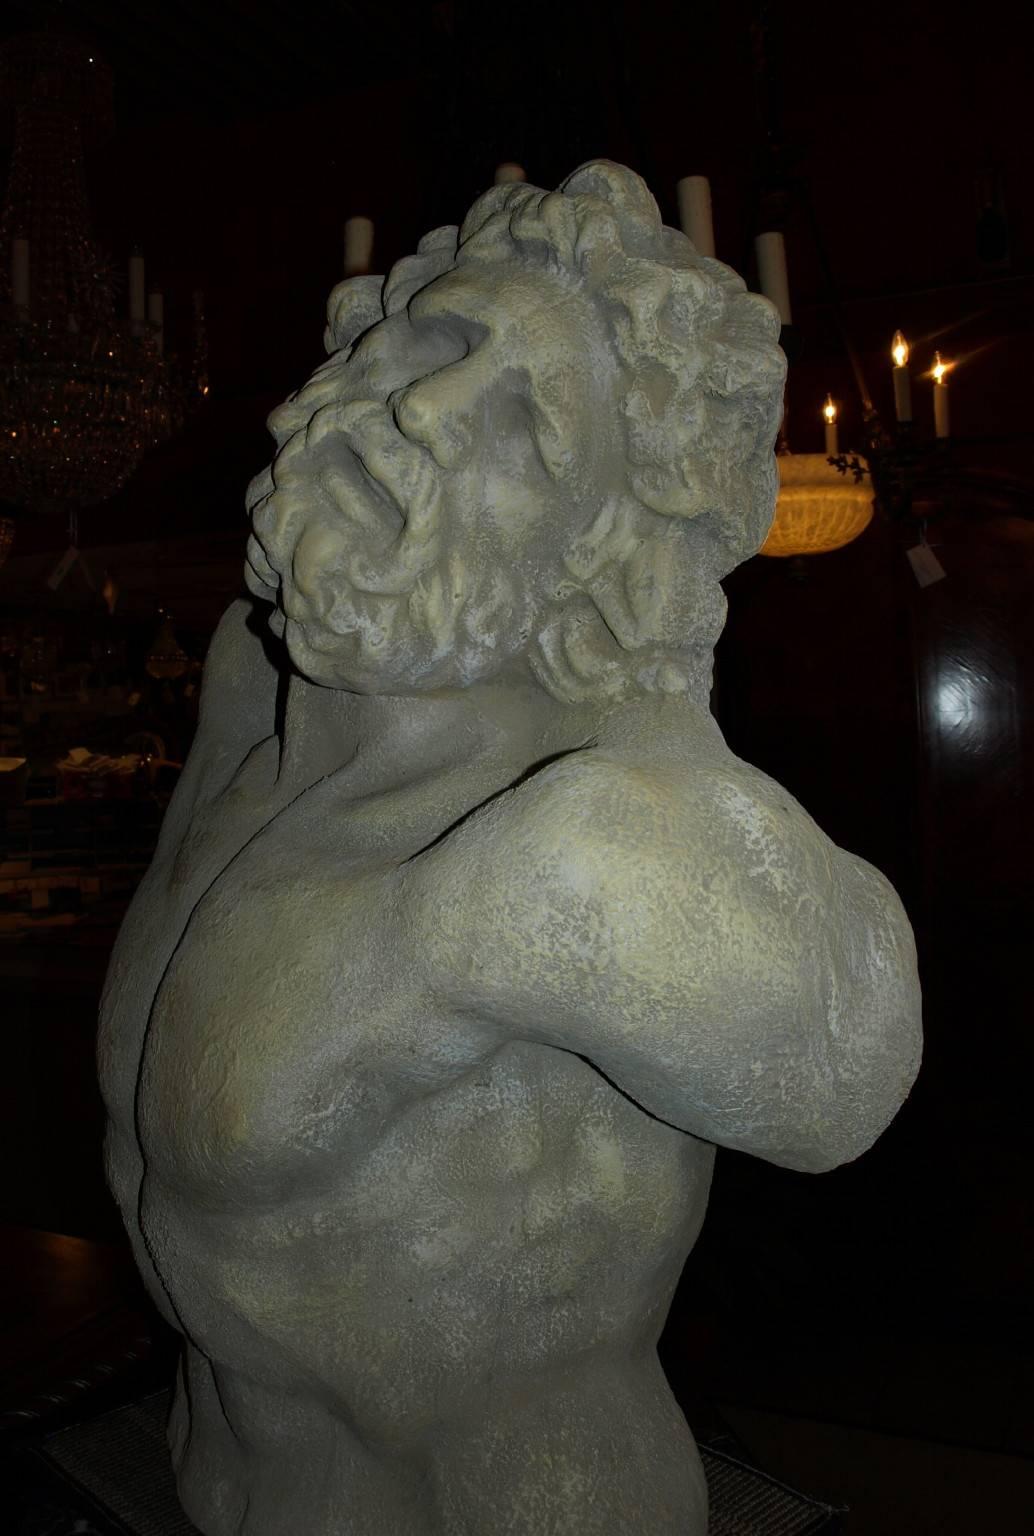 Classical and substantial bust of a figure of Greek and Roman mythology, Laocoon.